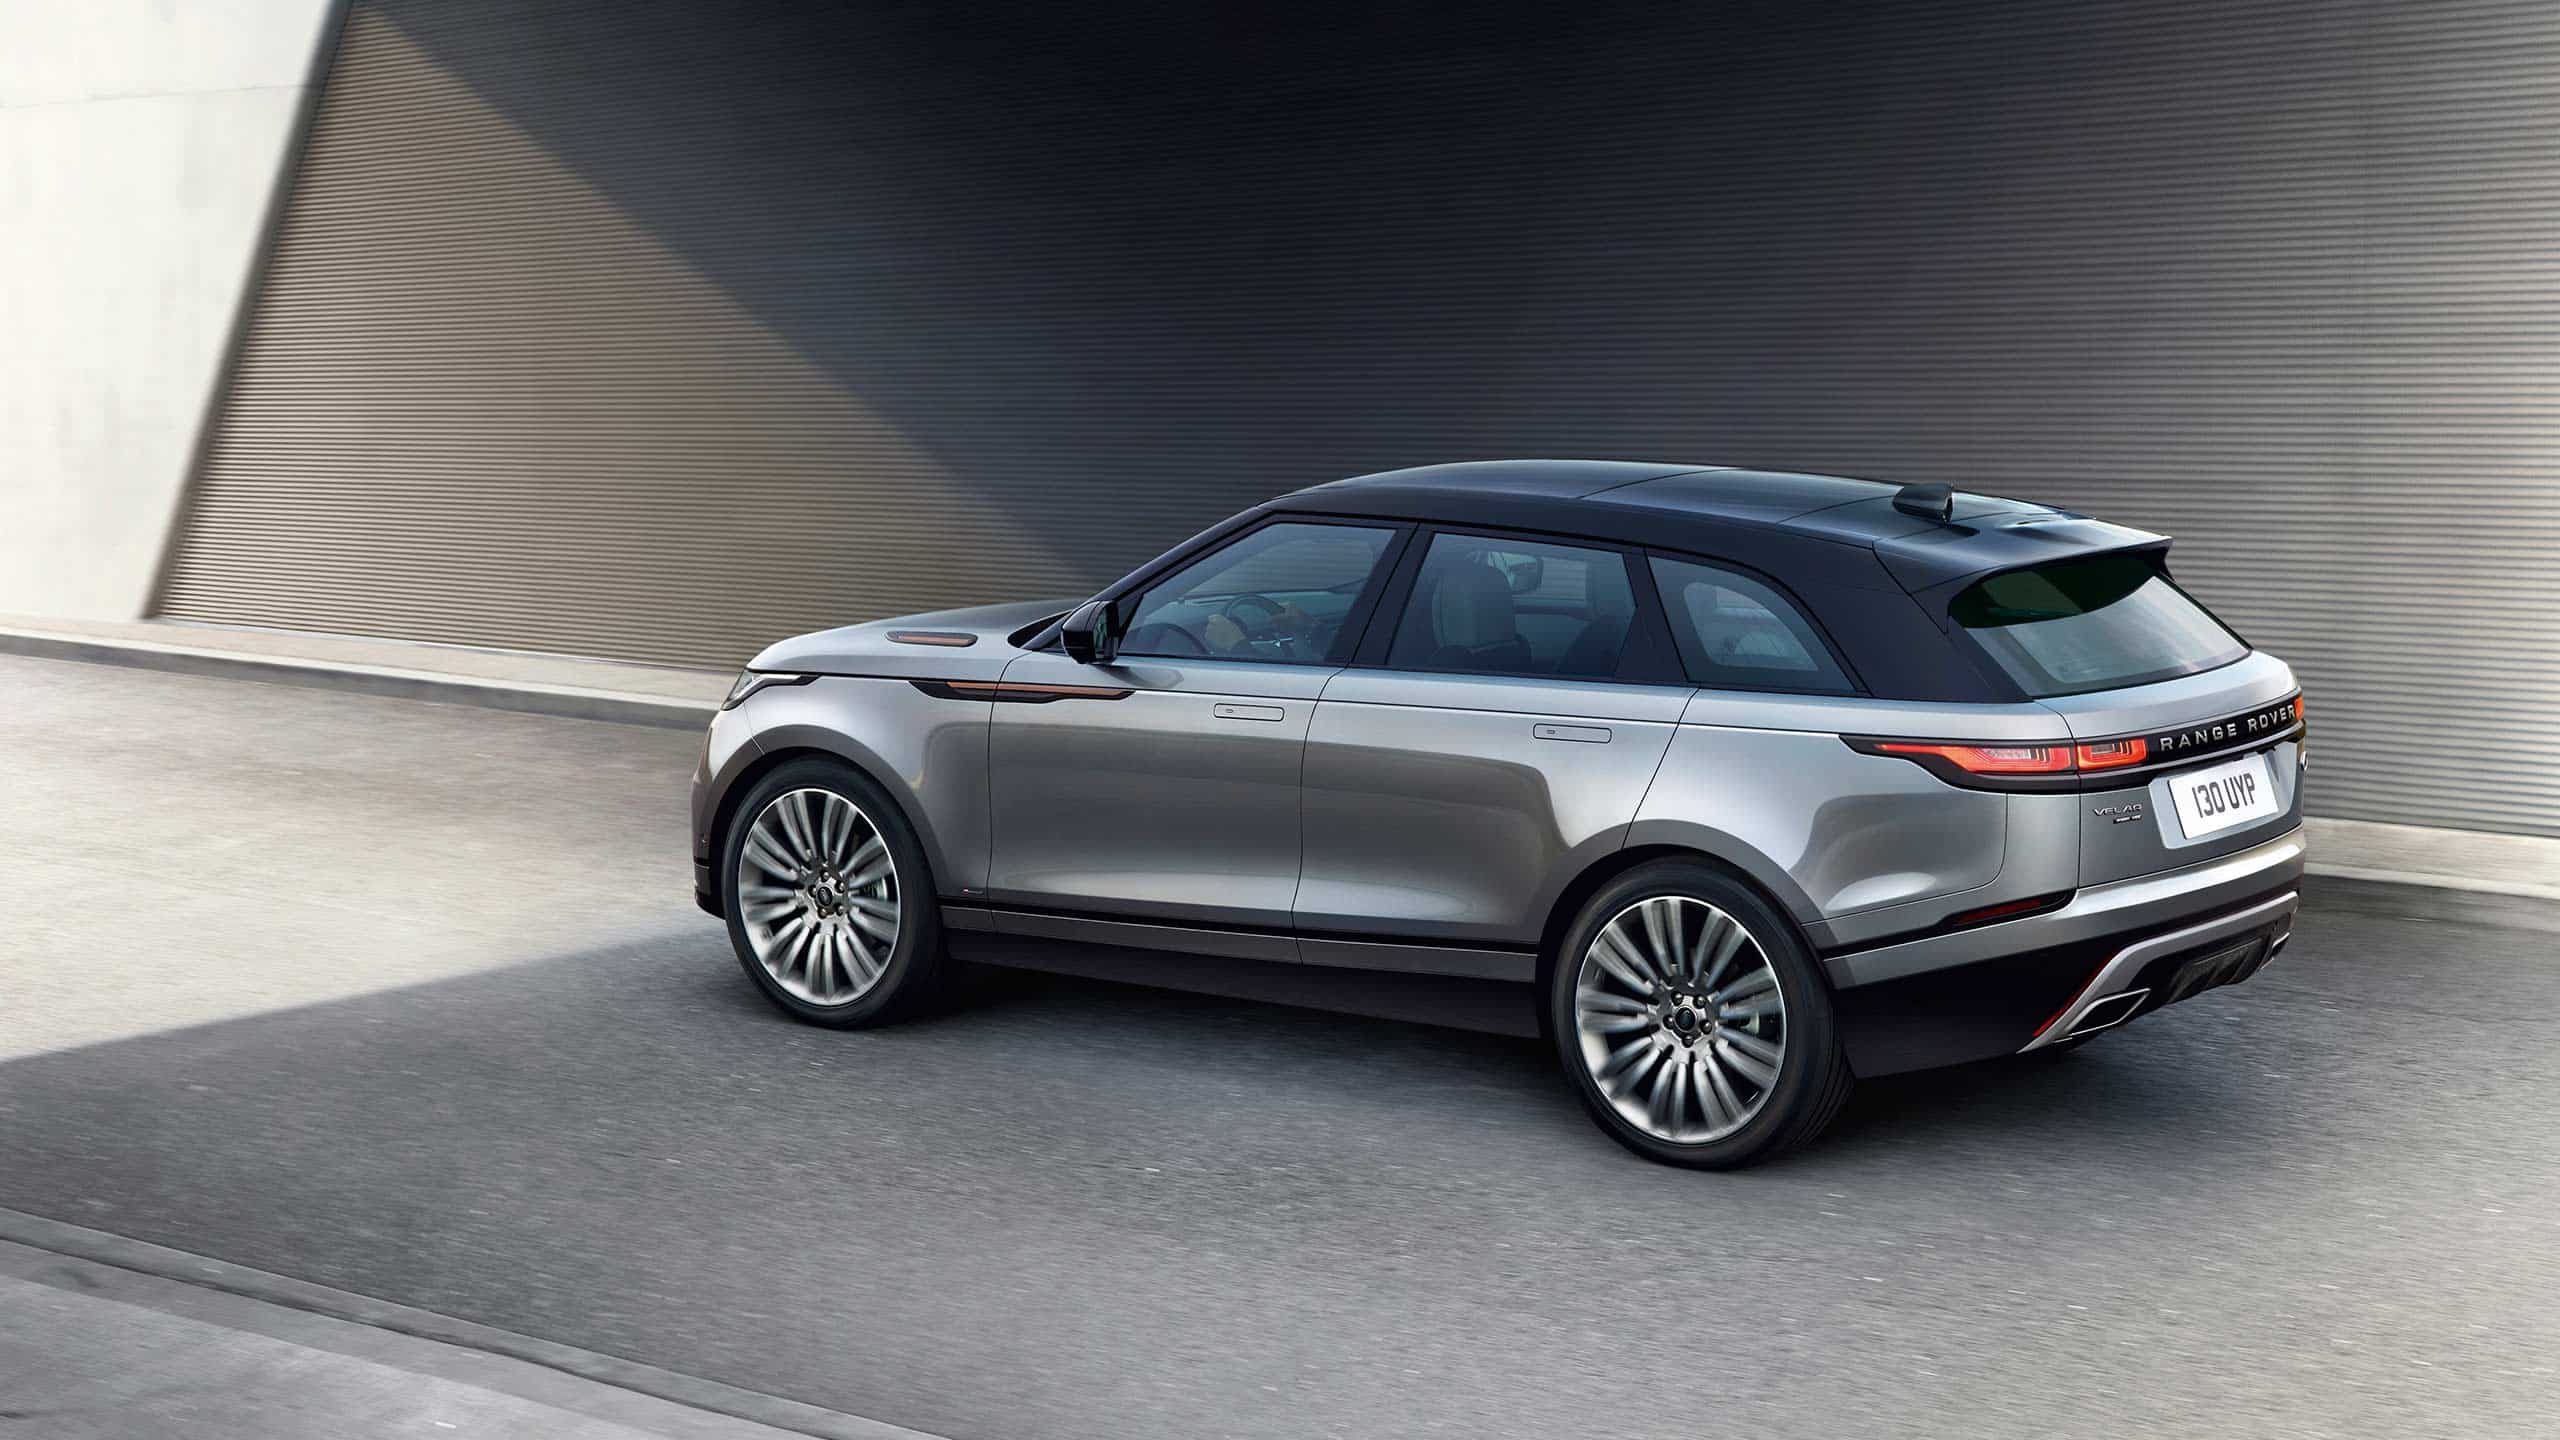 Range Rover Velar in grey driving on the road